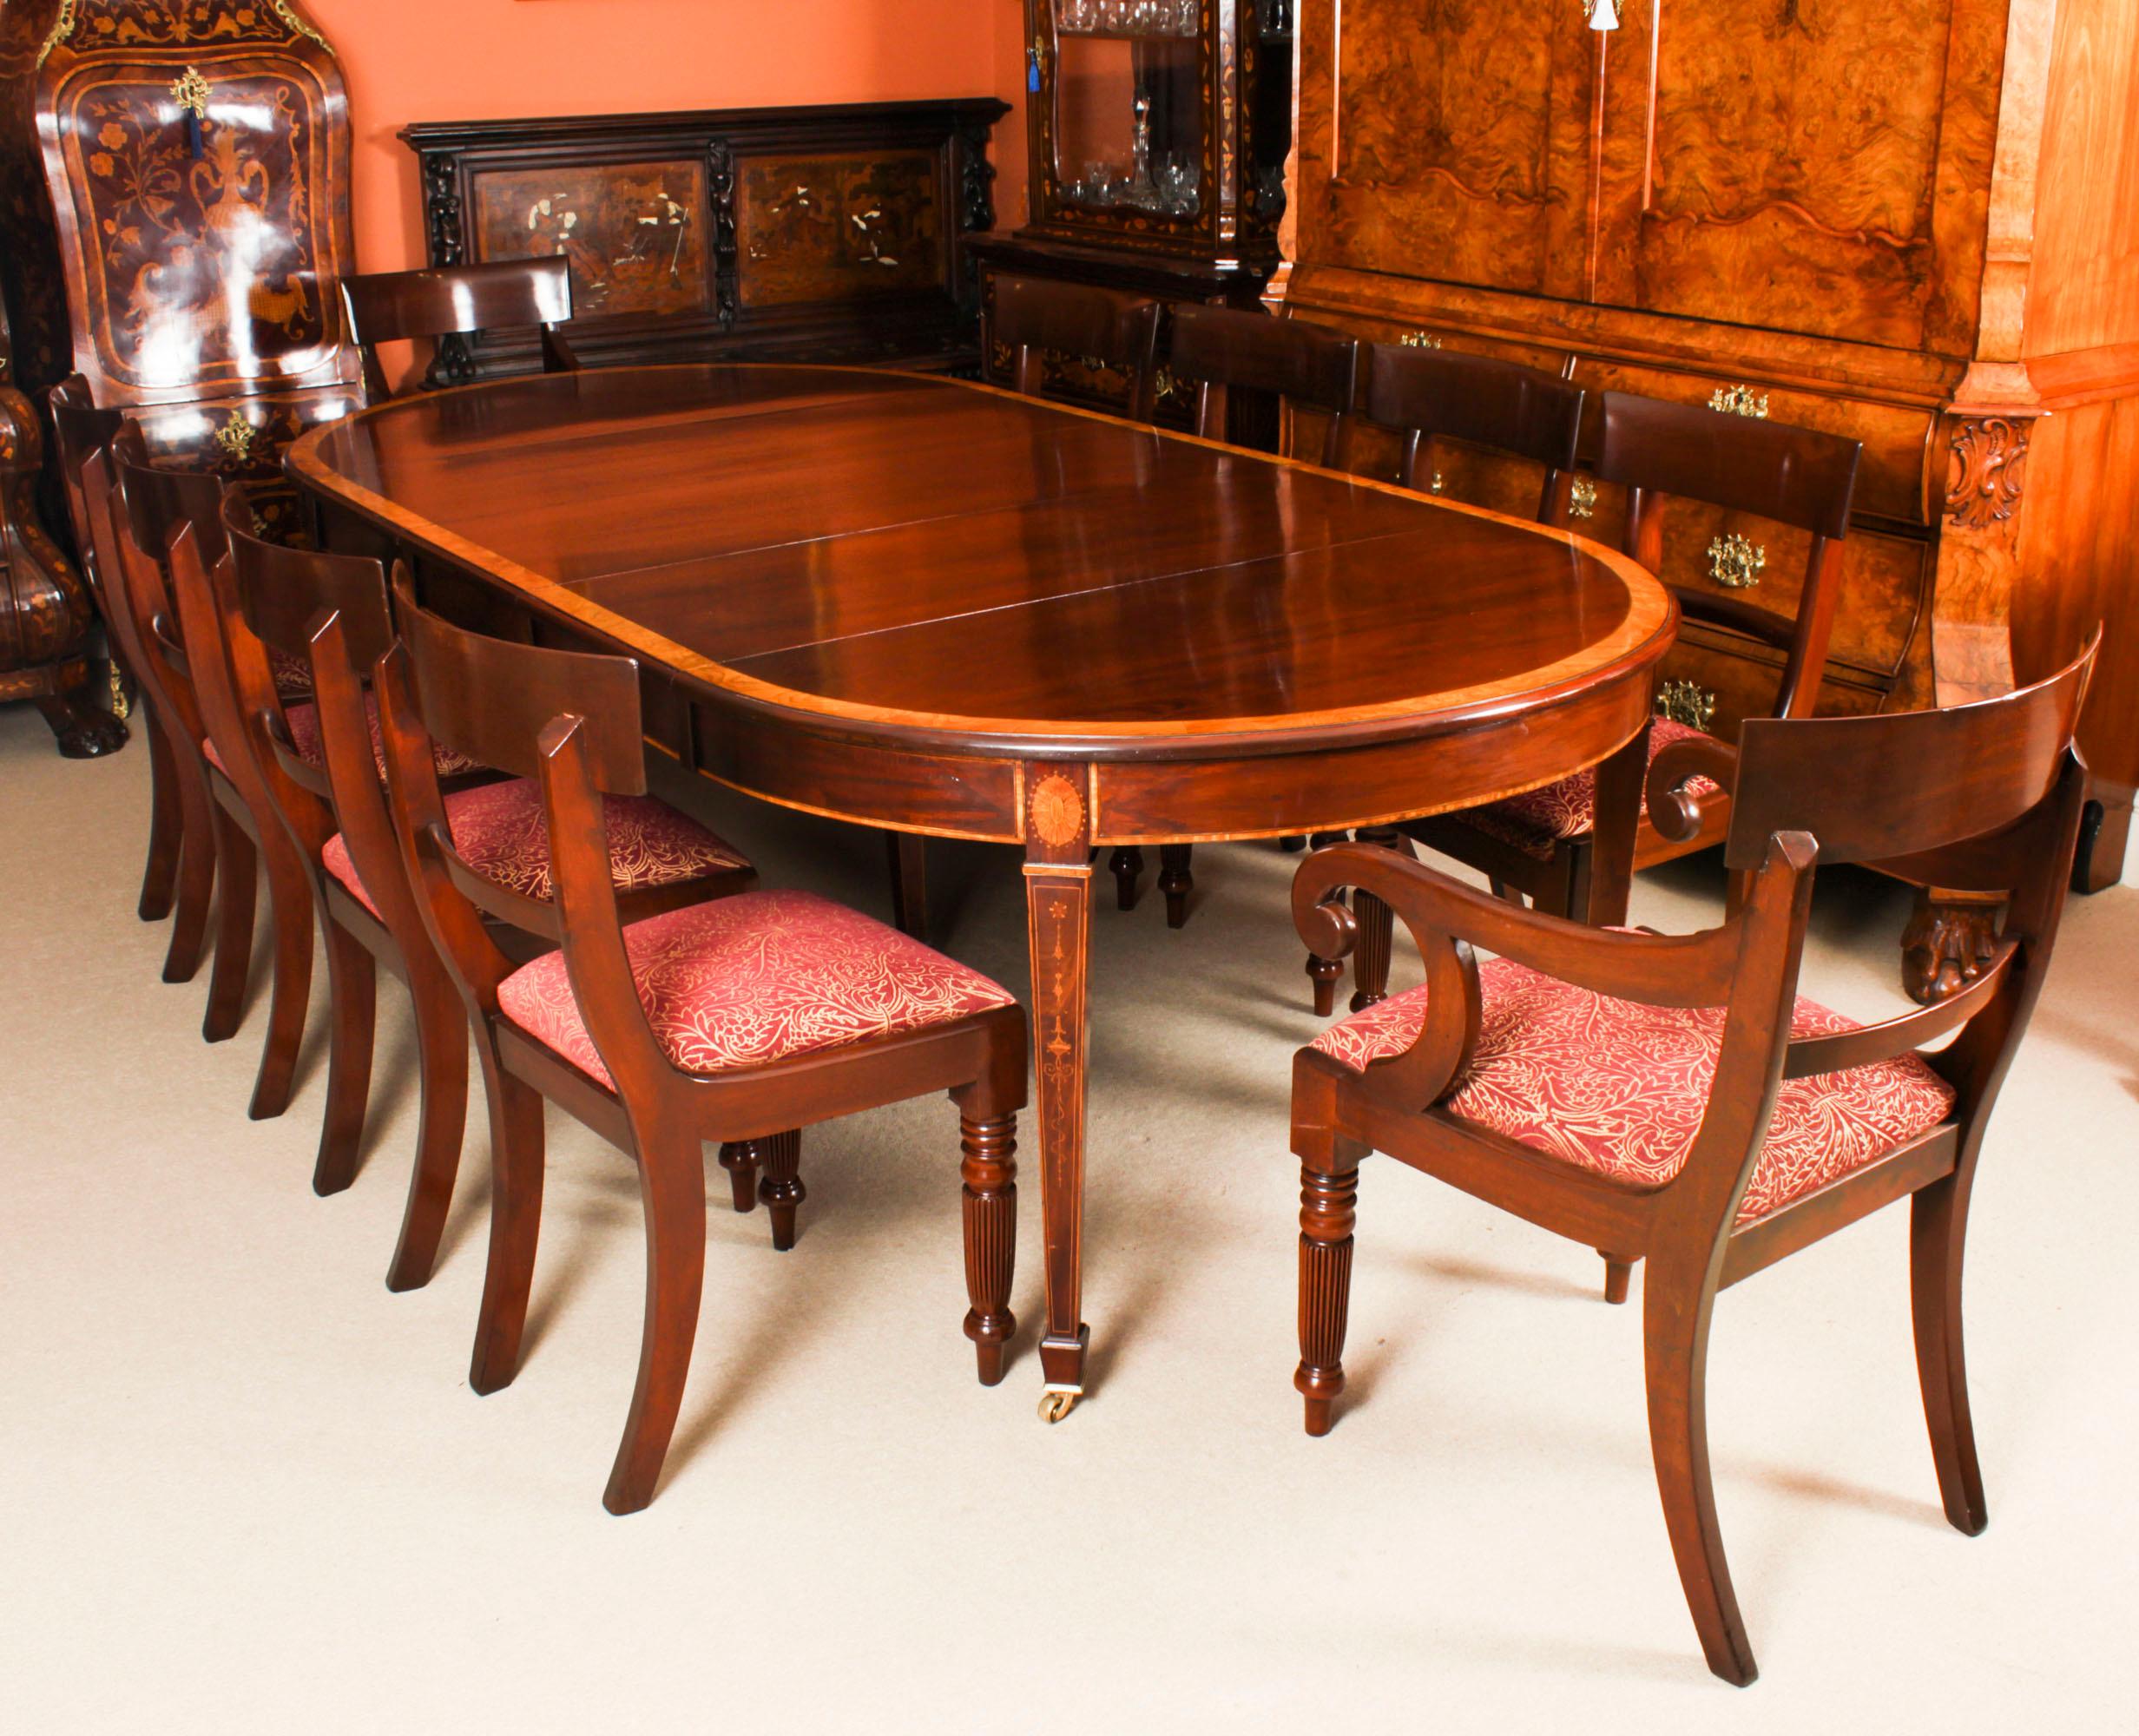 This is a fabulous antique Edwardian inlaid flame mahogany extending dining table, circa 1900 in date. 

The table has three original leaves and can comfortably seat ten. It has been hand-crafted from solid flame mahogany with a satinwood banded